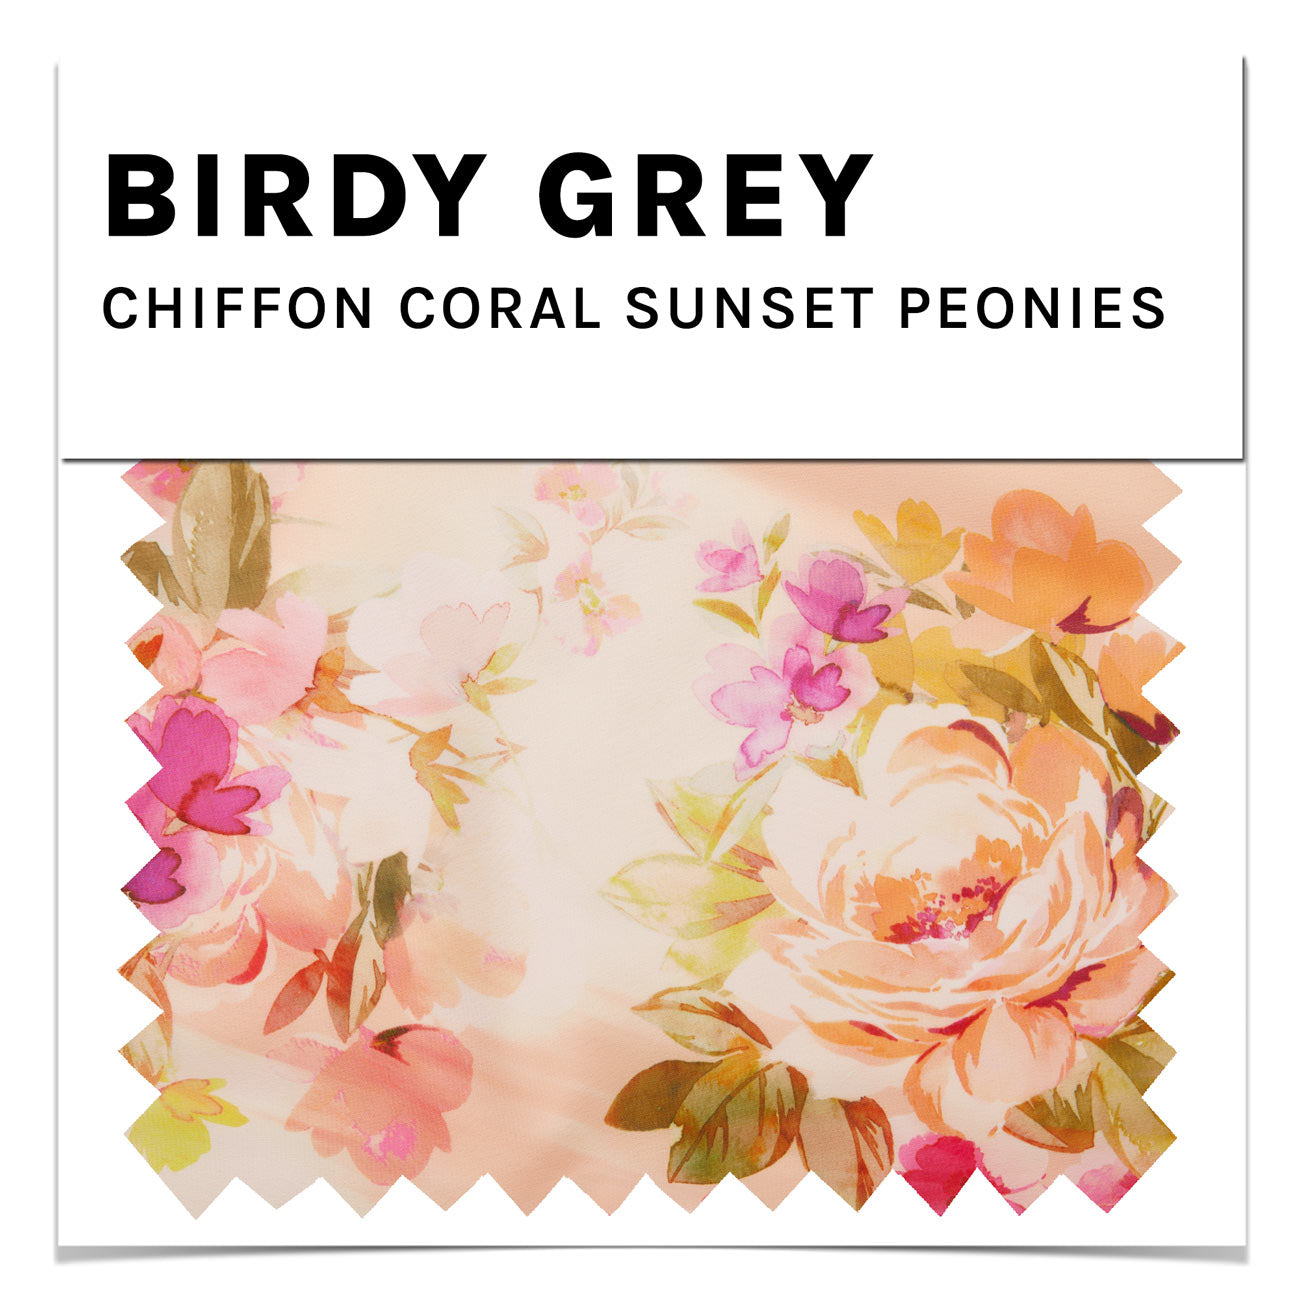 Coral Sunset Peonies Chiffon Swatch by Birdy Grey